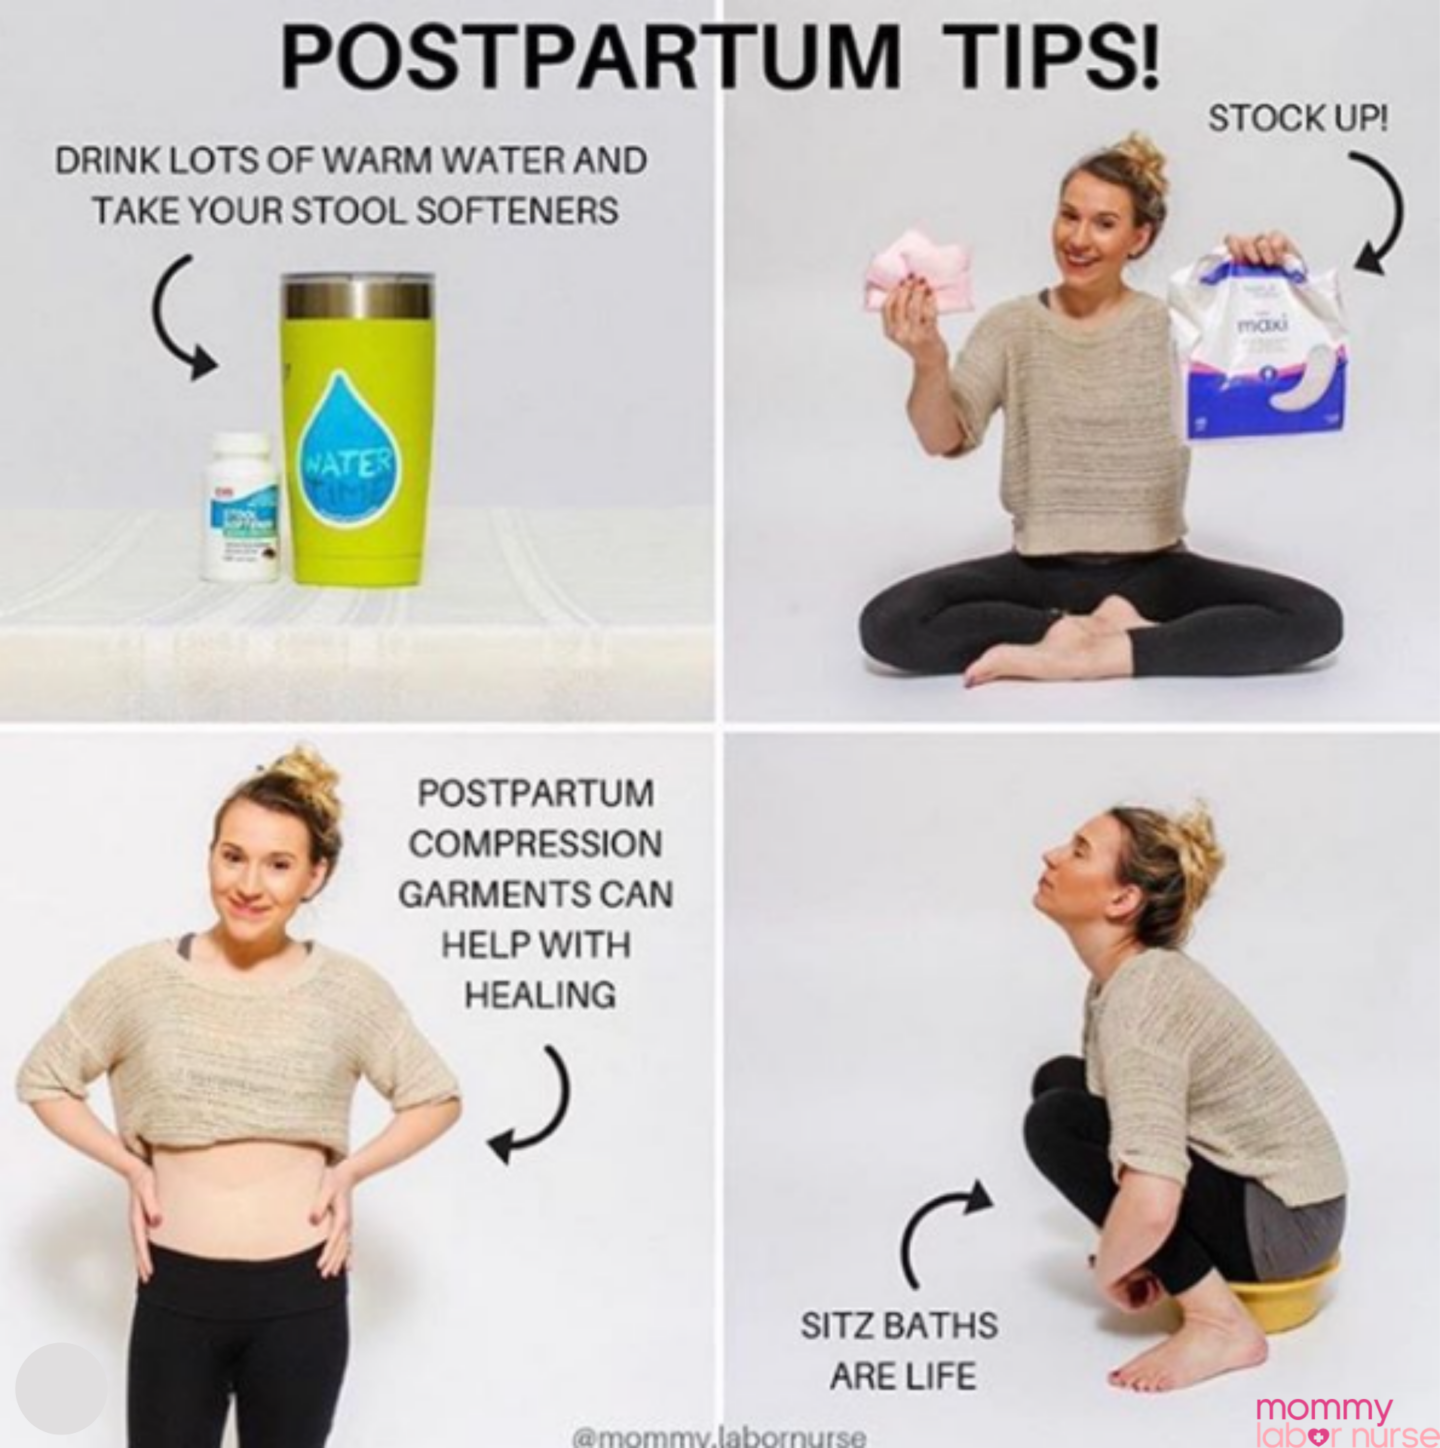 Postpartum Recovery: How To Take Care Of Yourself After Giving Birth?